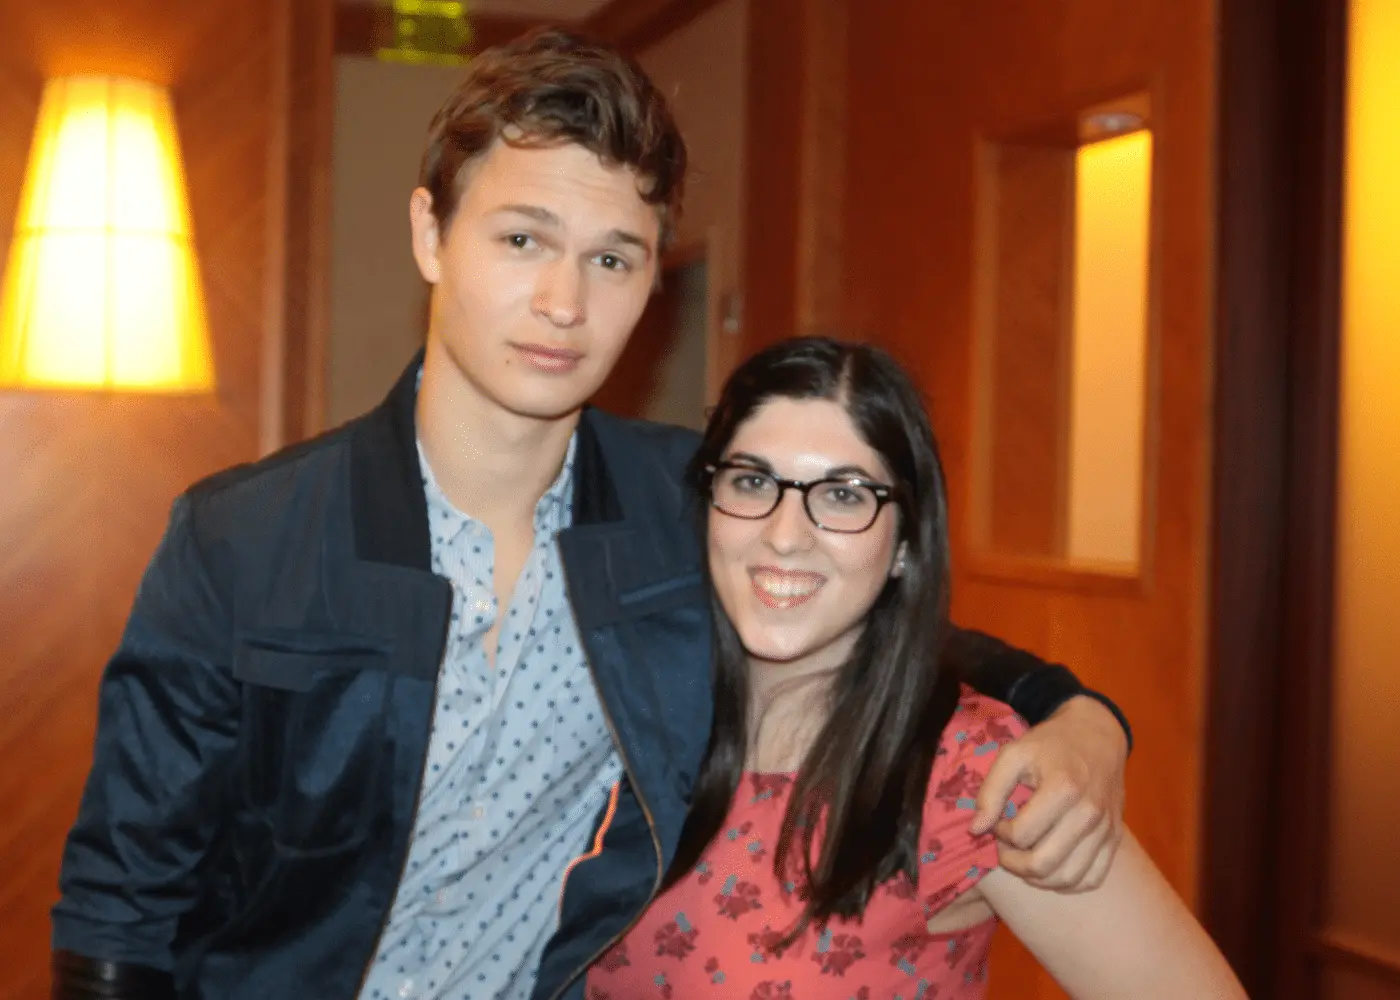 our intern posing with Ansel Elgort at The Fault in our Stars opening